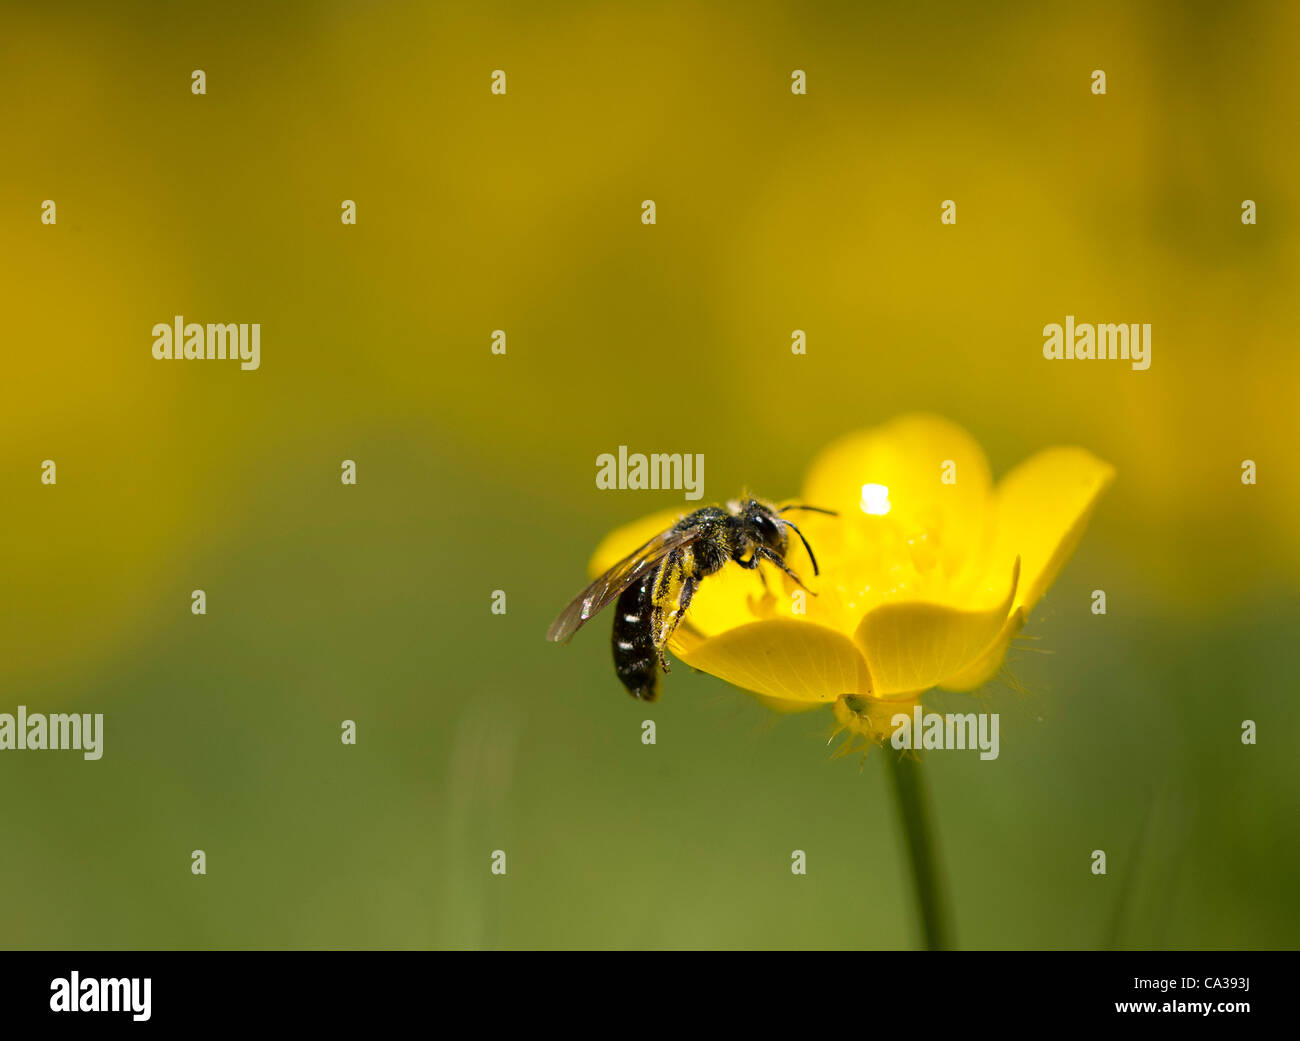 May 30, 2012 - Roseburg, Oregon, U.S - A small pollen covered sweat bee alights on a yellow wildflower growing in a field at River Forks County Park near Roseburg. Sweat bees are part of a large family of small bees found in most of the world except Australia and Southeast Asia. Sweat bees are consi Stock Photo